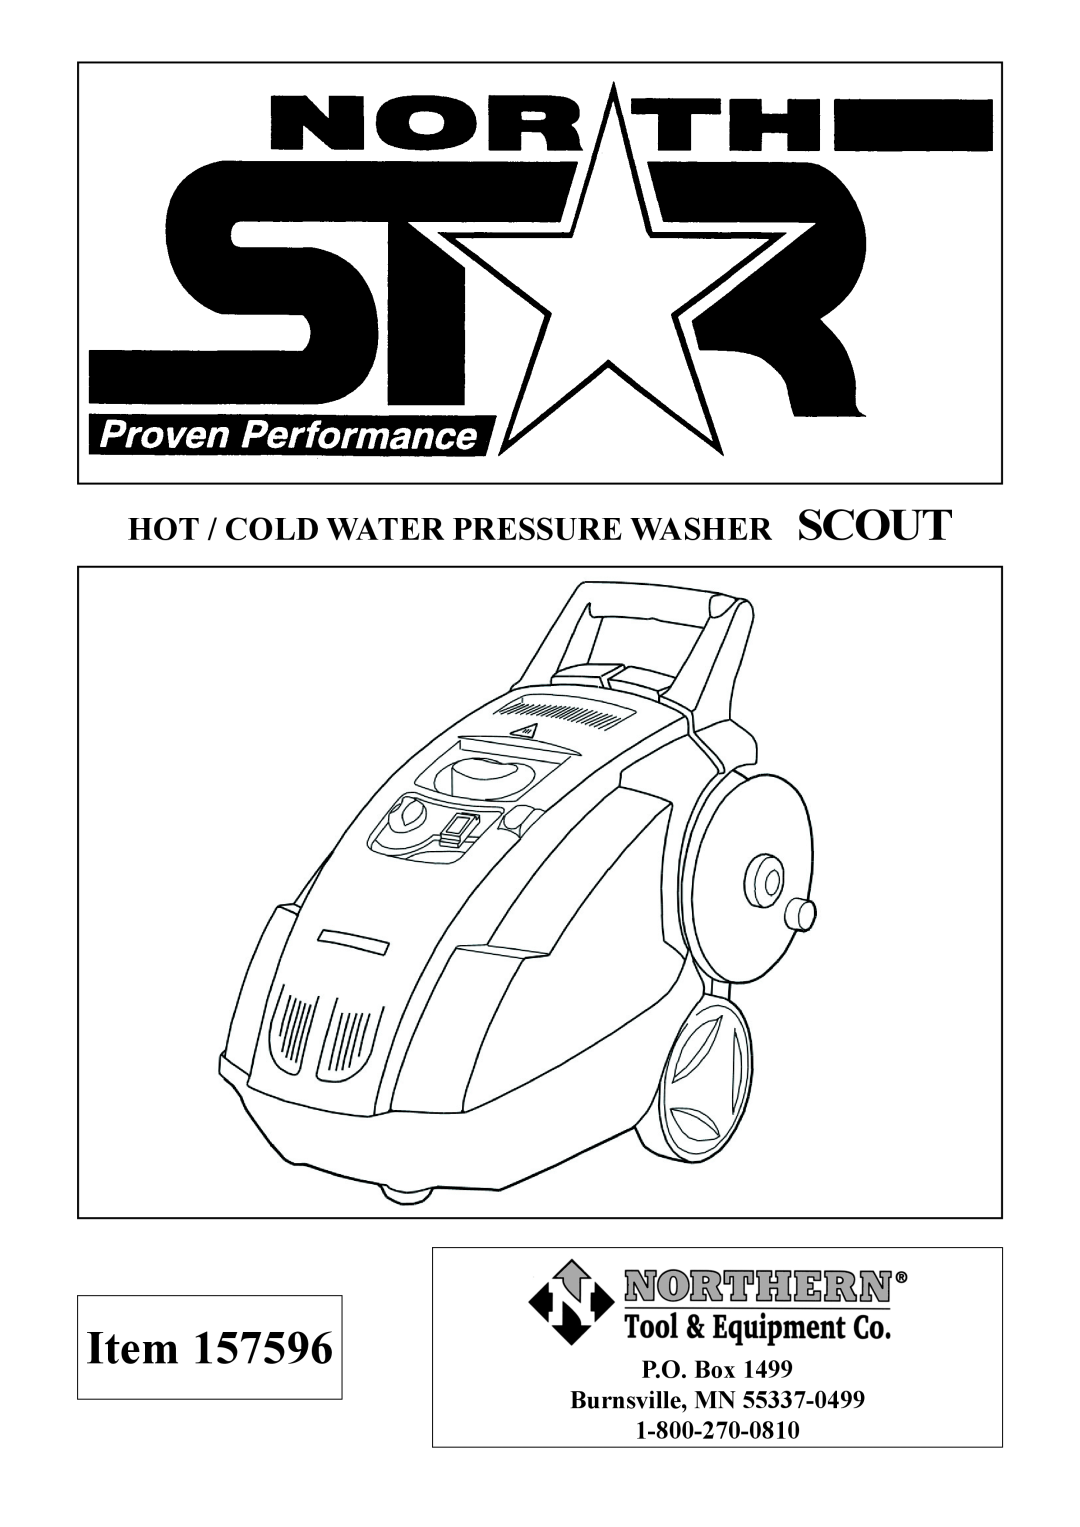 North Star 157596 manual Hot / Cold Water Pressure Washer Scout, P.O. Box Burnsville, MN 